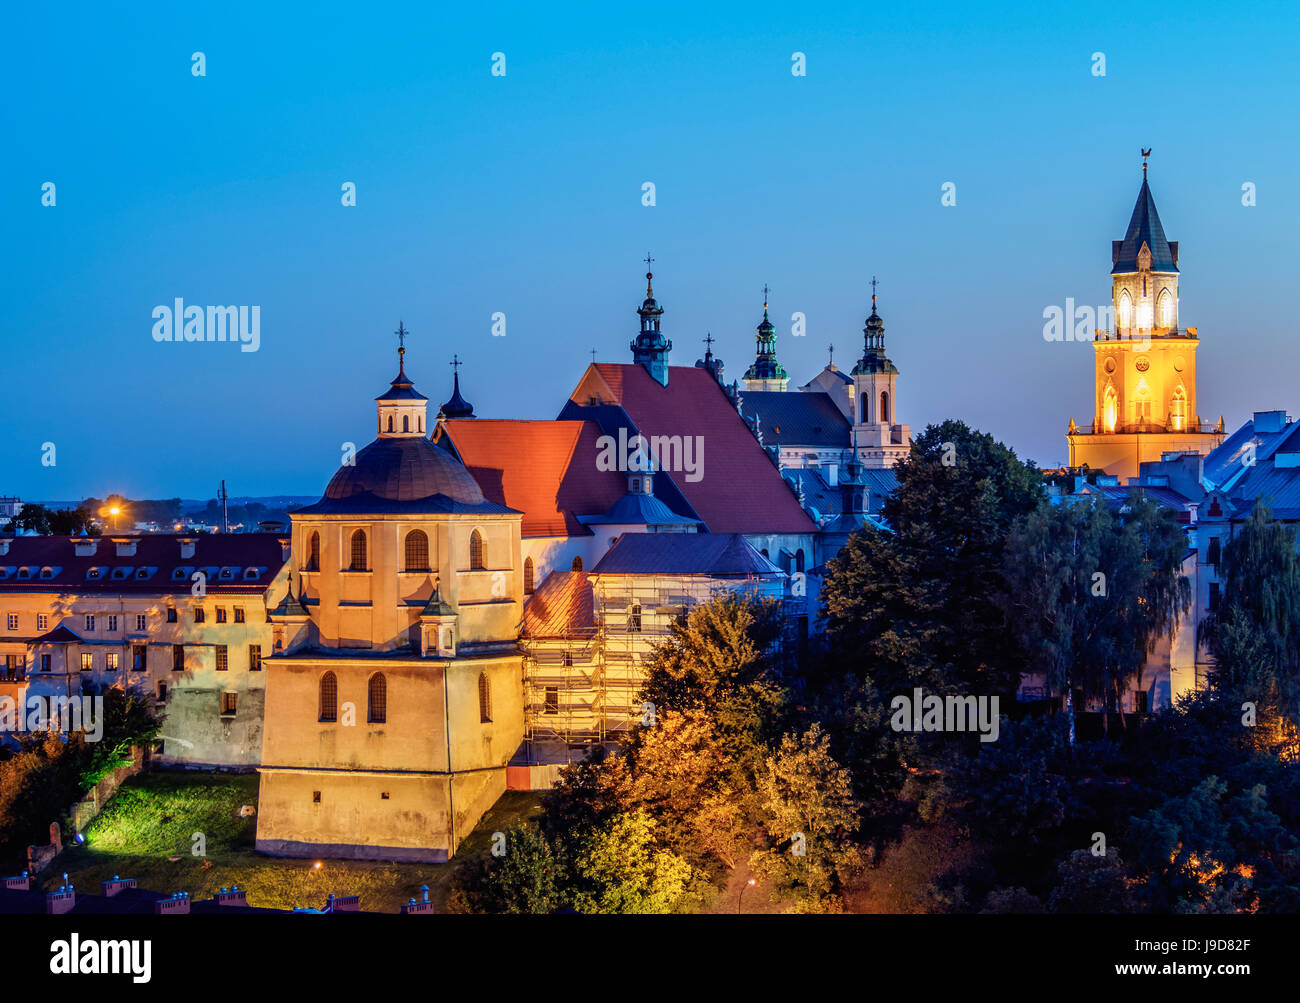 Dominican Priory and Trinitarian Tower at twilight, Old Town, City of Lublin, Lublin Voivodeship, Poland, Europe Stock Photo